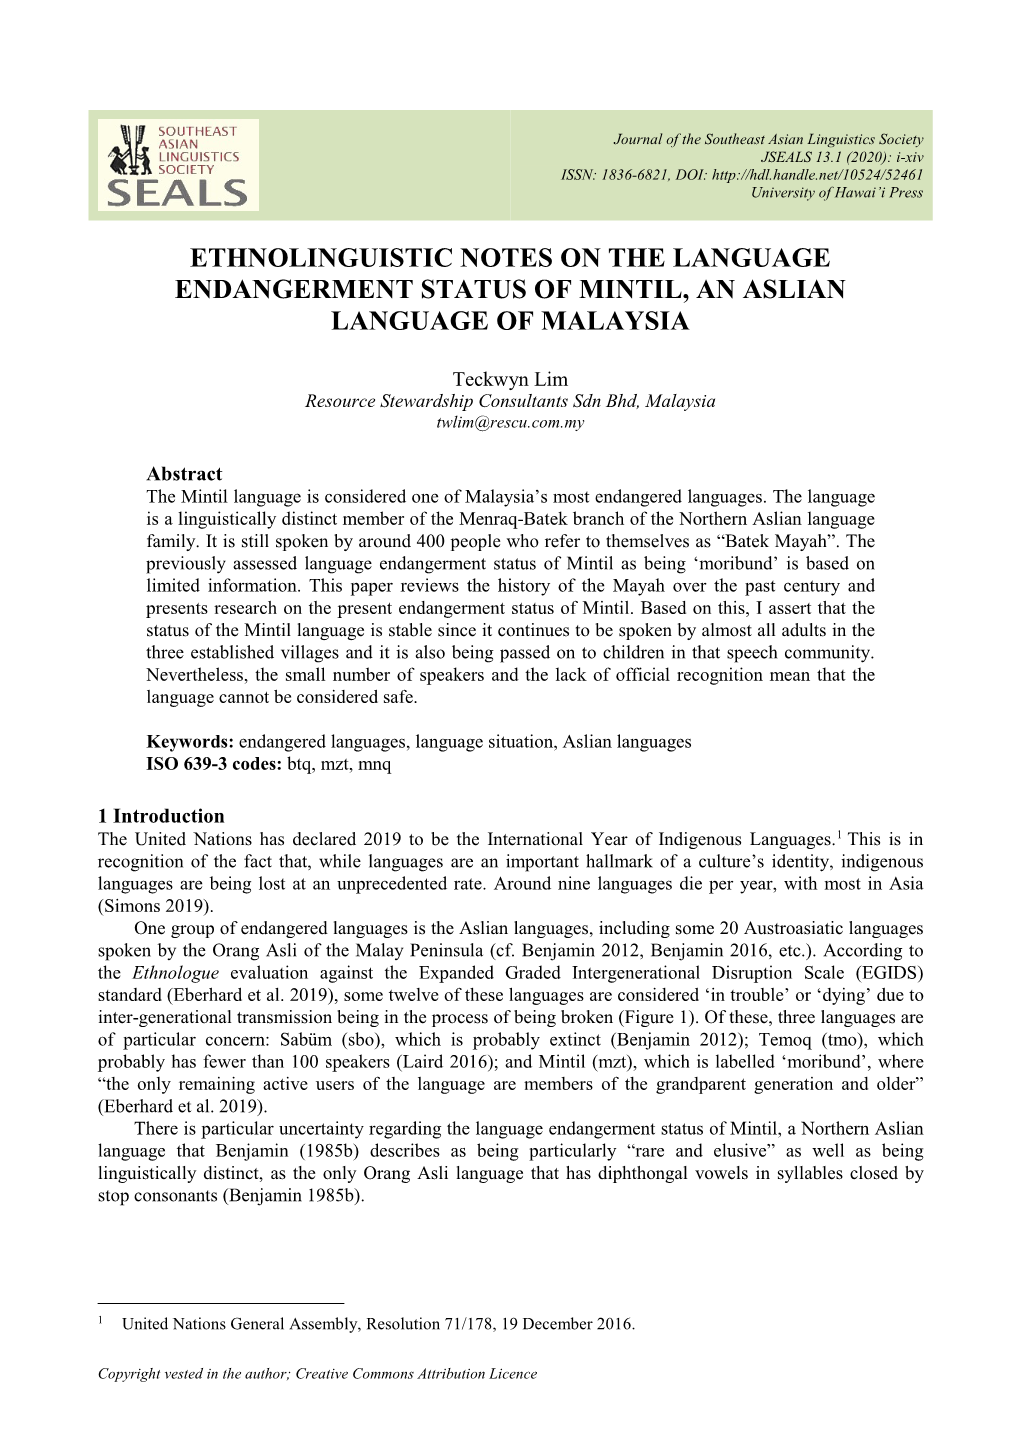 Ethnolinguistic Notes on the Language Endangerment Status of Mintil, an Aslian Language of Malaysia